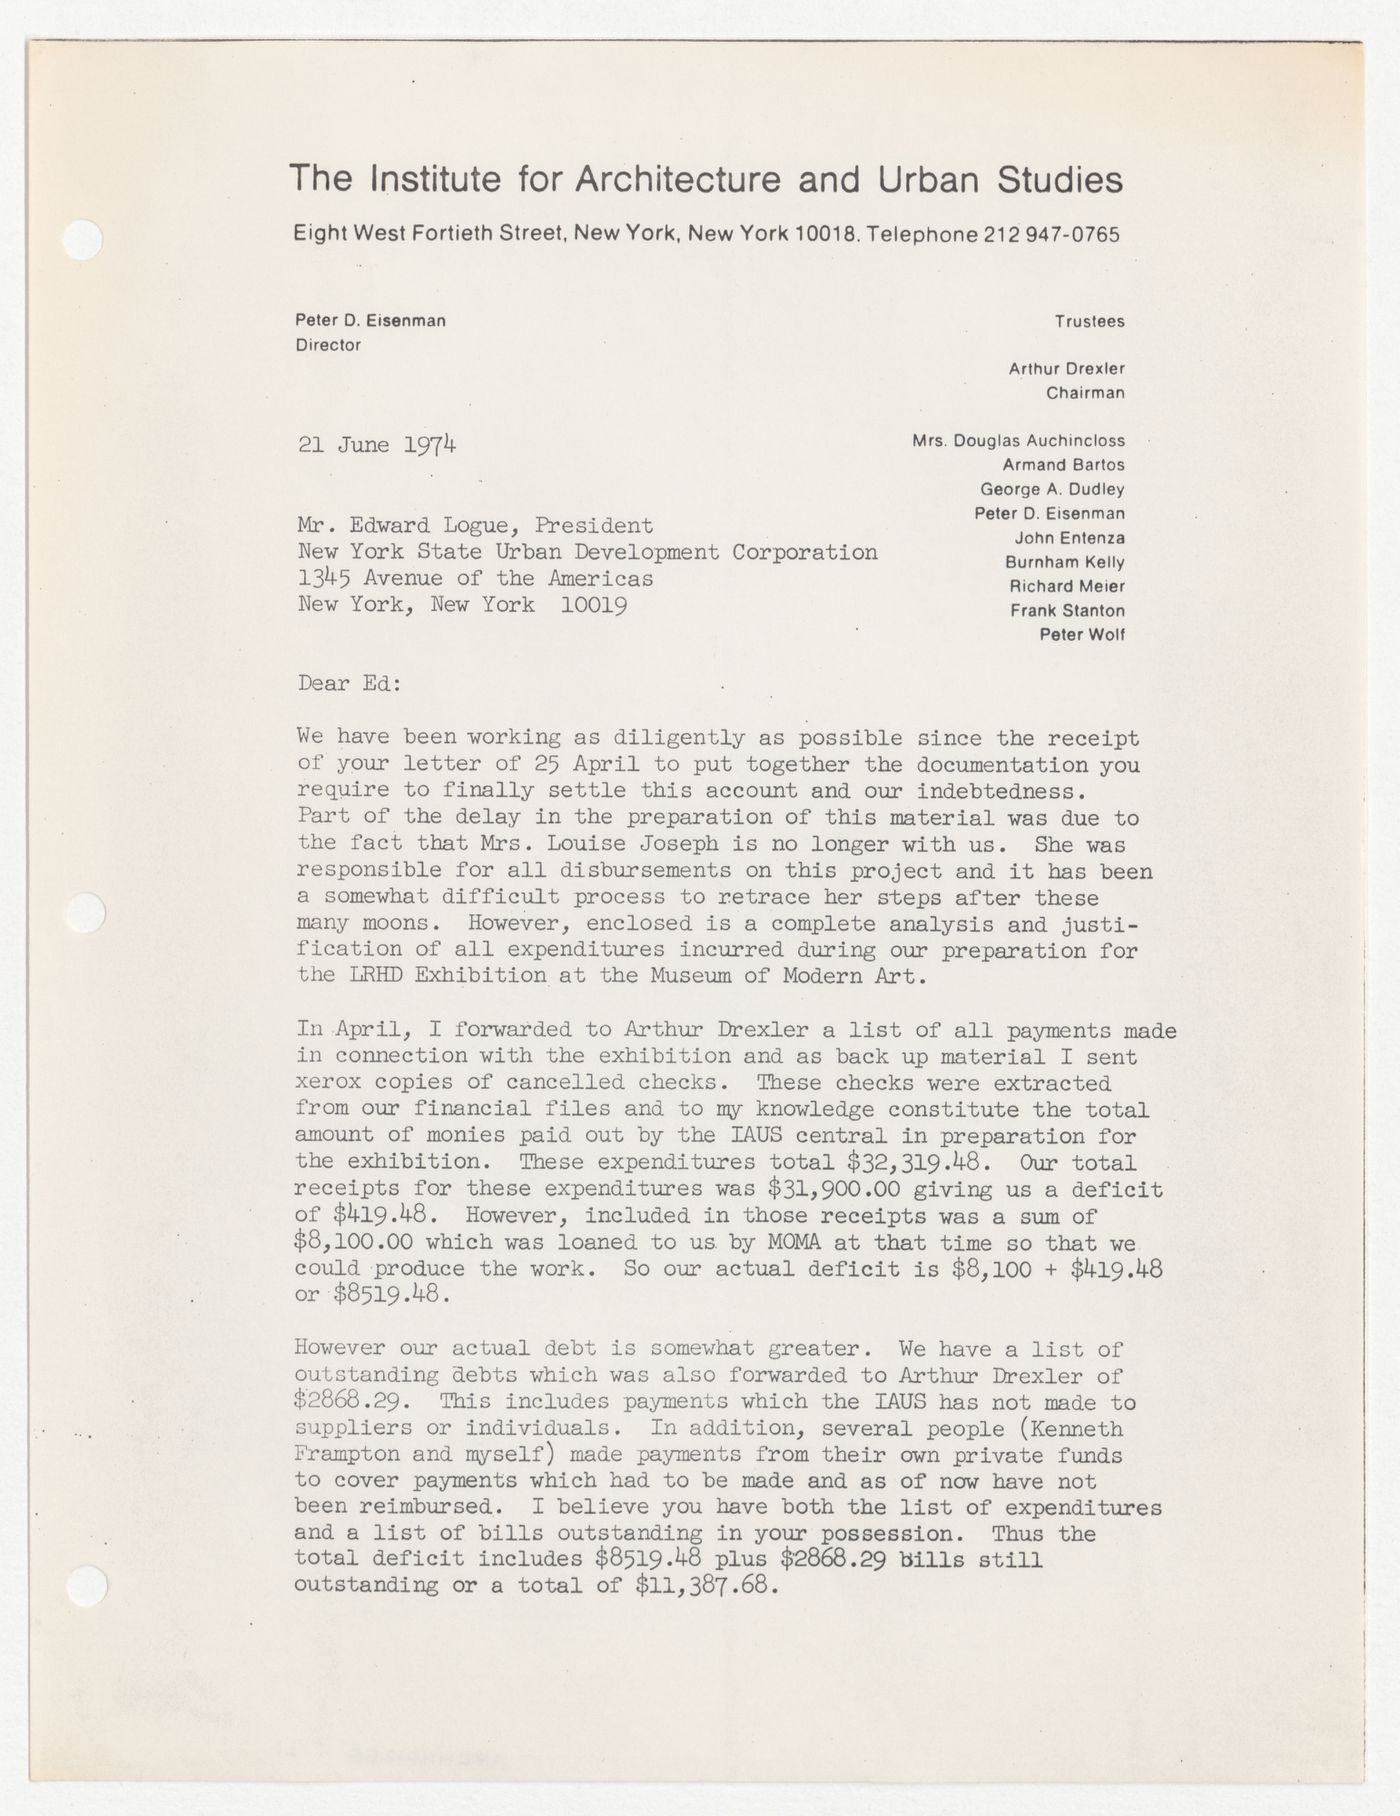 Letter from Peter D. Eisenman to Edward J. Logue about IAUS debts